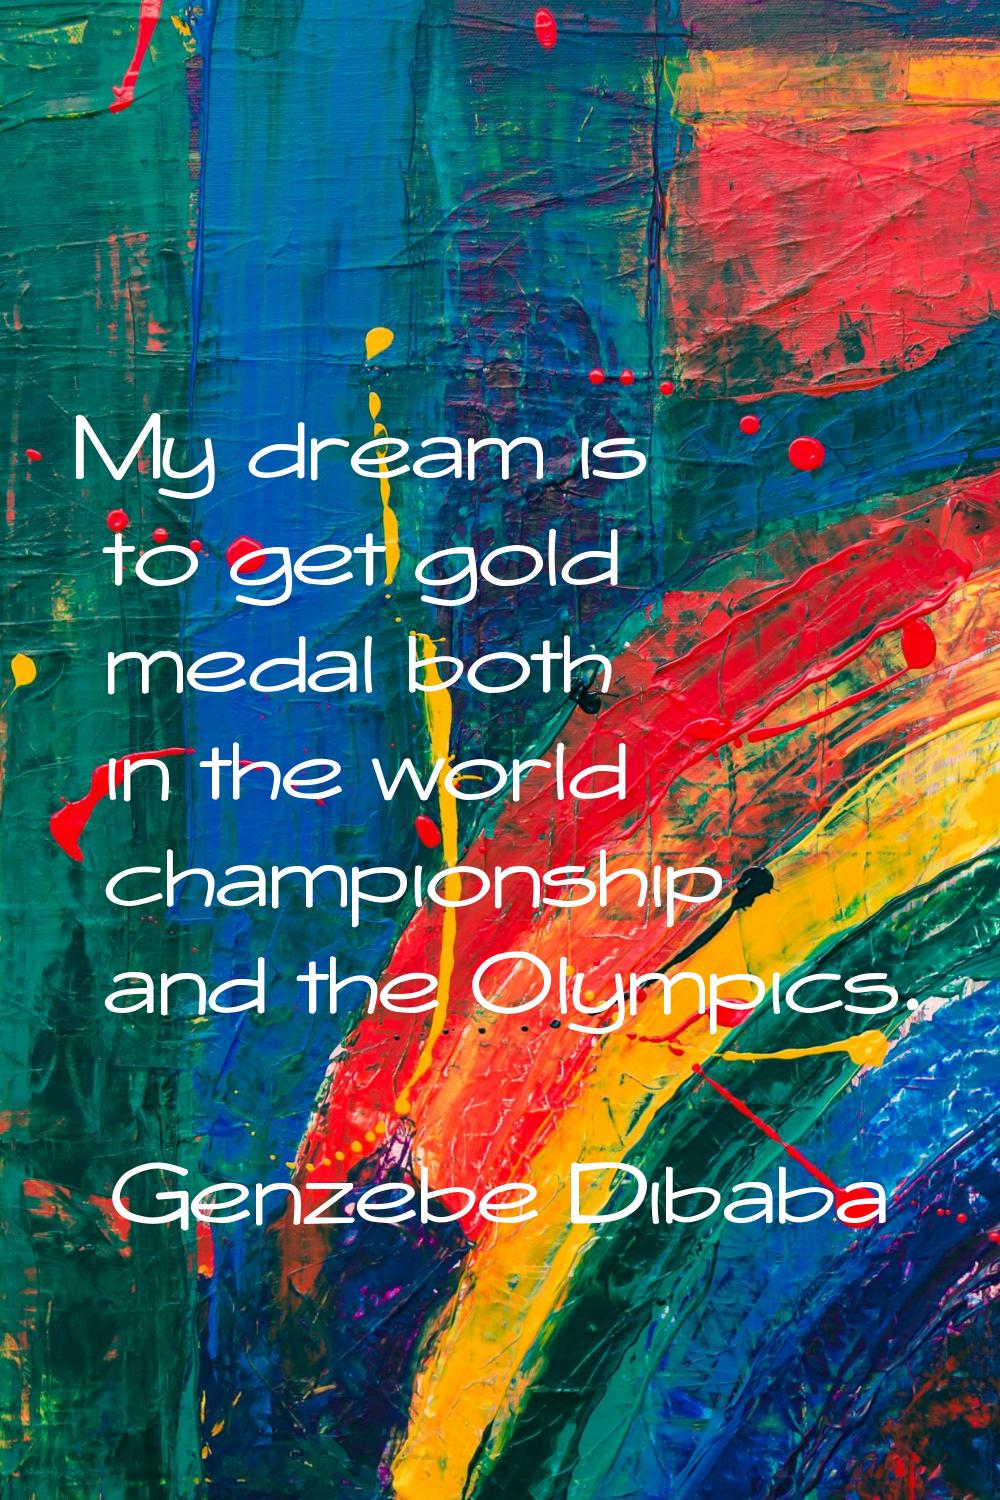 My dream is to get gold medal both in the world championship and the Olympics.